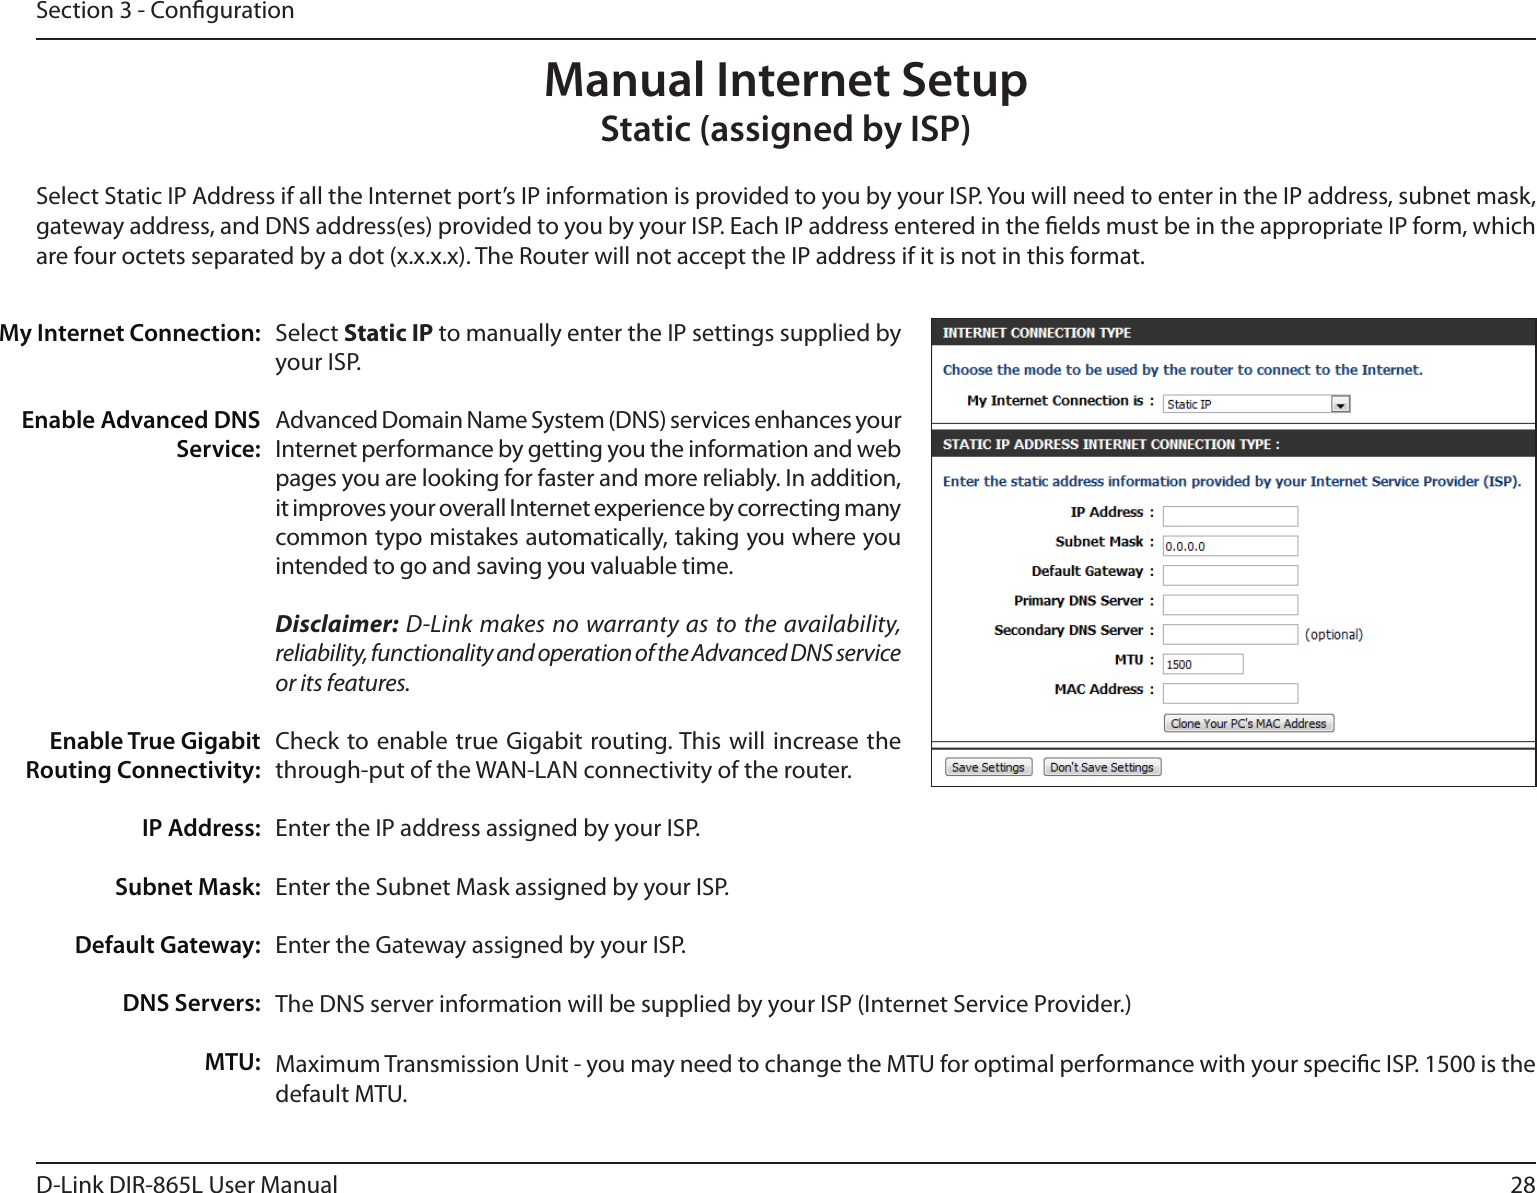 28D-Link DIR-865L User ManualSection 3 - CongurationSelect Static IP to manually enter the IP settings supplied by your ISP.Advanced Domain Name System (DNS) services enhances your Internet performance by getting you the information and web pages you are looking for faster and more reliably. In addition, it improves your overall Internet experience by correcting many common typo mistakes automatically, taking you where you intended to go and saving you valuable time.Disclaimer: D-Link makes no warranty as to the availability, reliability, functionality and operation of the Advanced DNS service or its features.Check to enable true  Gigabit routing. This will increase the through-put of the WAN-LAN connectivity of the router.Enter the IP address assigned by your ISP.Enter the Subnet Mask assigned by your ISP.Enter the Gateway assigned by your ISP.The DNS server information will be supplied by your ISP (Internet Service Provider.)Maximum Transmission Unit - you may need to change the MTU for optimal performance with your specic ISP. 1500 is the default MTU.My Internet Connection:Enable Advanced DNS Service:Enable True Gigabit Routing Connectivity:IP Address:Subnet Mask:Default Gateway:DNS Servers:MTU:Manual Internet SetupStatic (assigned by ISP)Select Static IP Address if all the Internet port’s IP information is provided to you by your ISP. You will need to enter in the IP address, subnet mask, gateway address, and DNS address(es) provided to you by your ISP. Each IP address entered in the elds must be in the appropriate IP form, which are four octets separated by a dot (x.x.x.x). The Router will not accept the IP address if it is not in this format.